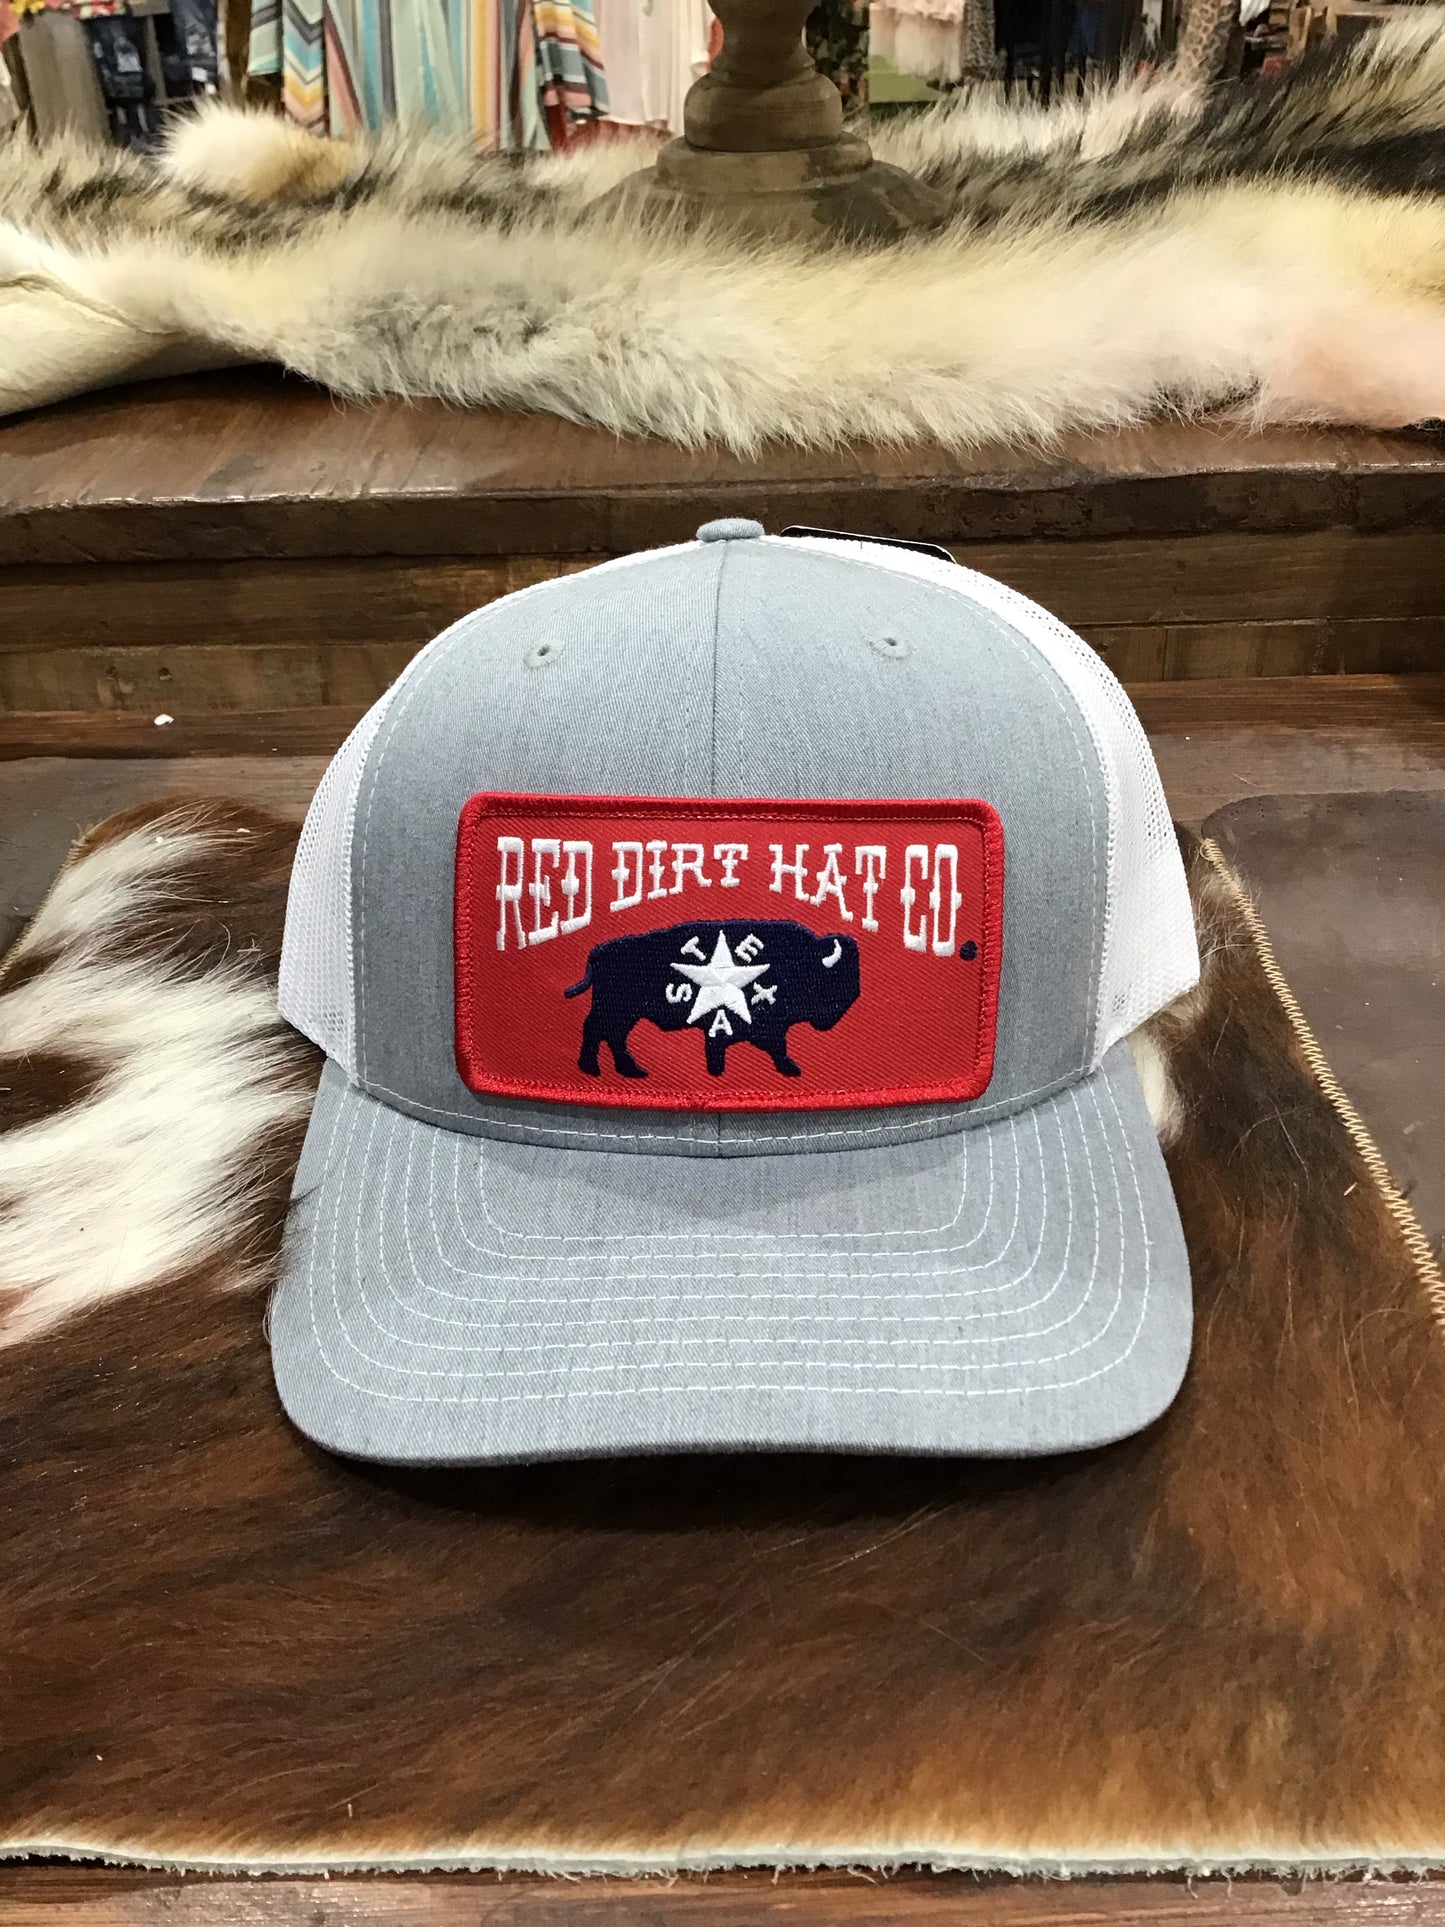 Red Dirt Hat Company “Republic of Texas”